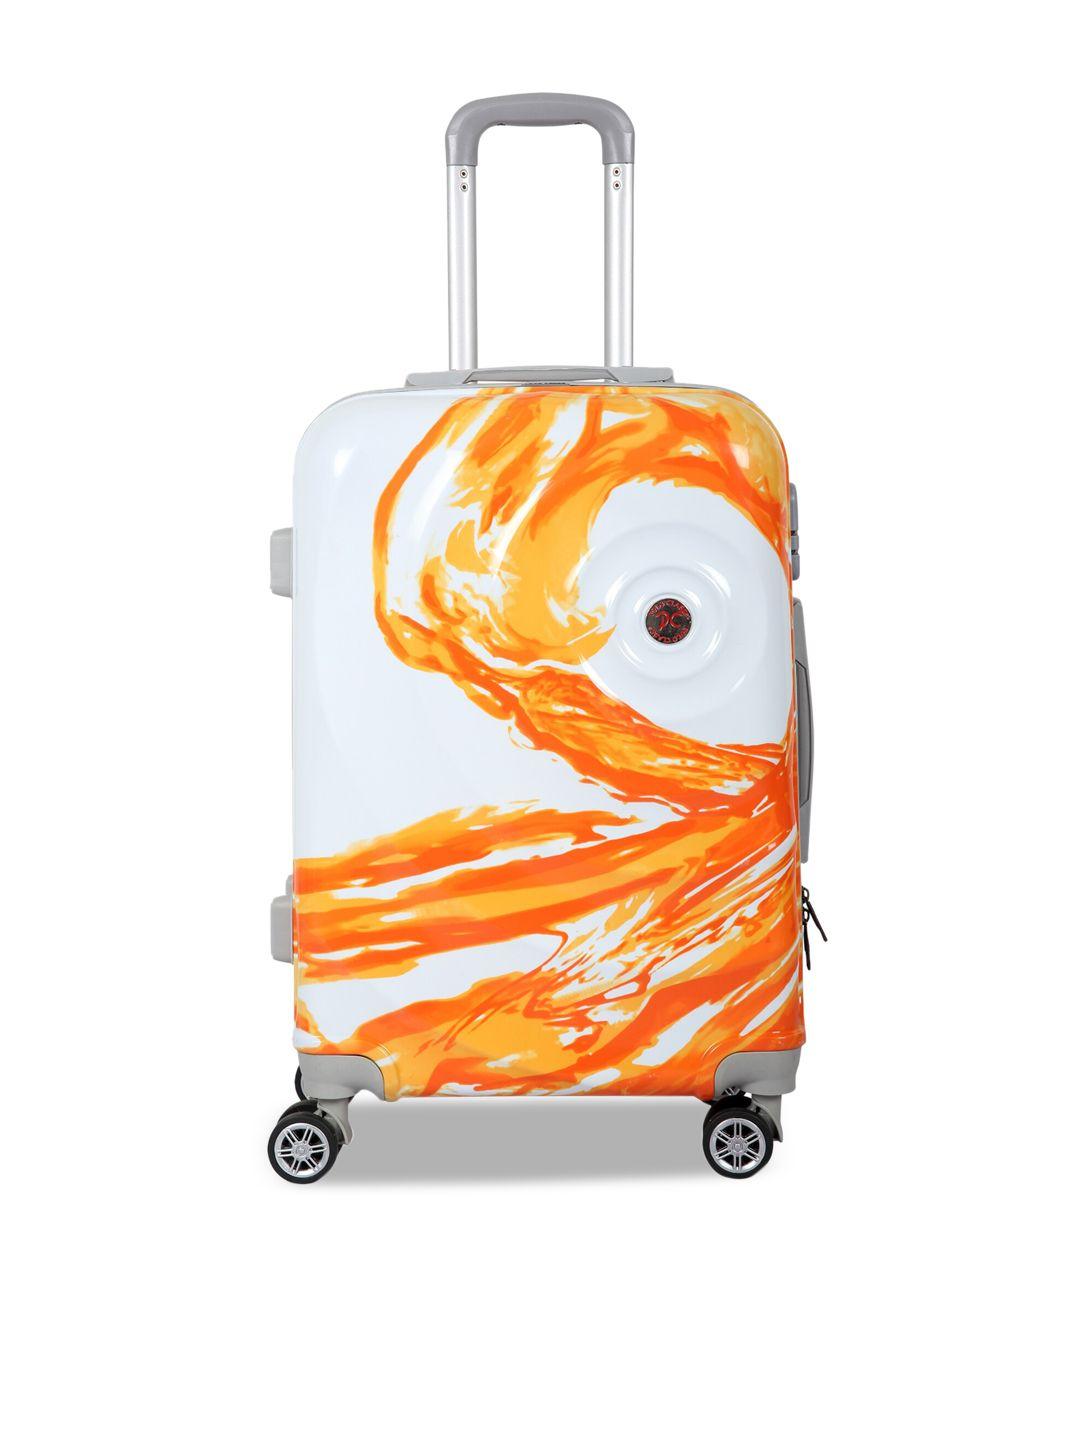 Polo Class Unisex Orange Printed Hard-Sided Cabin Trolley Suitcase